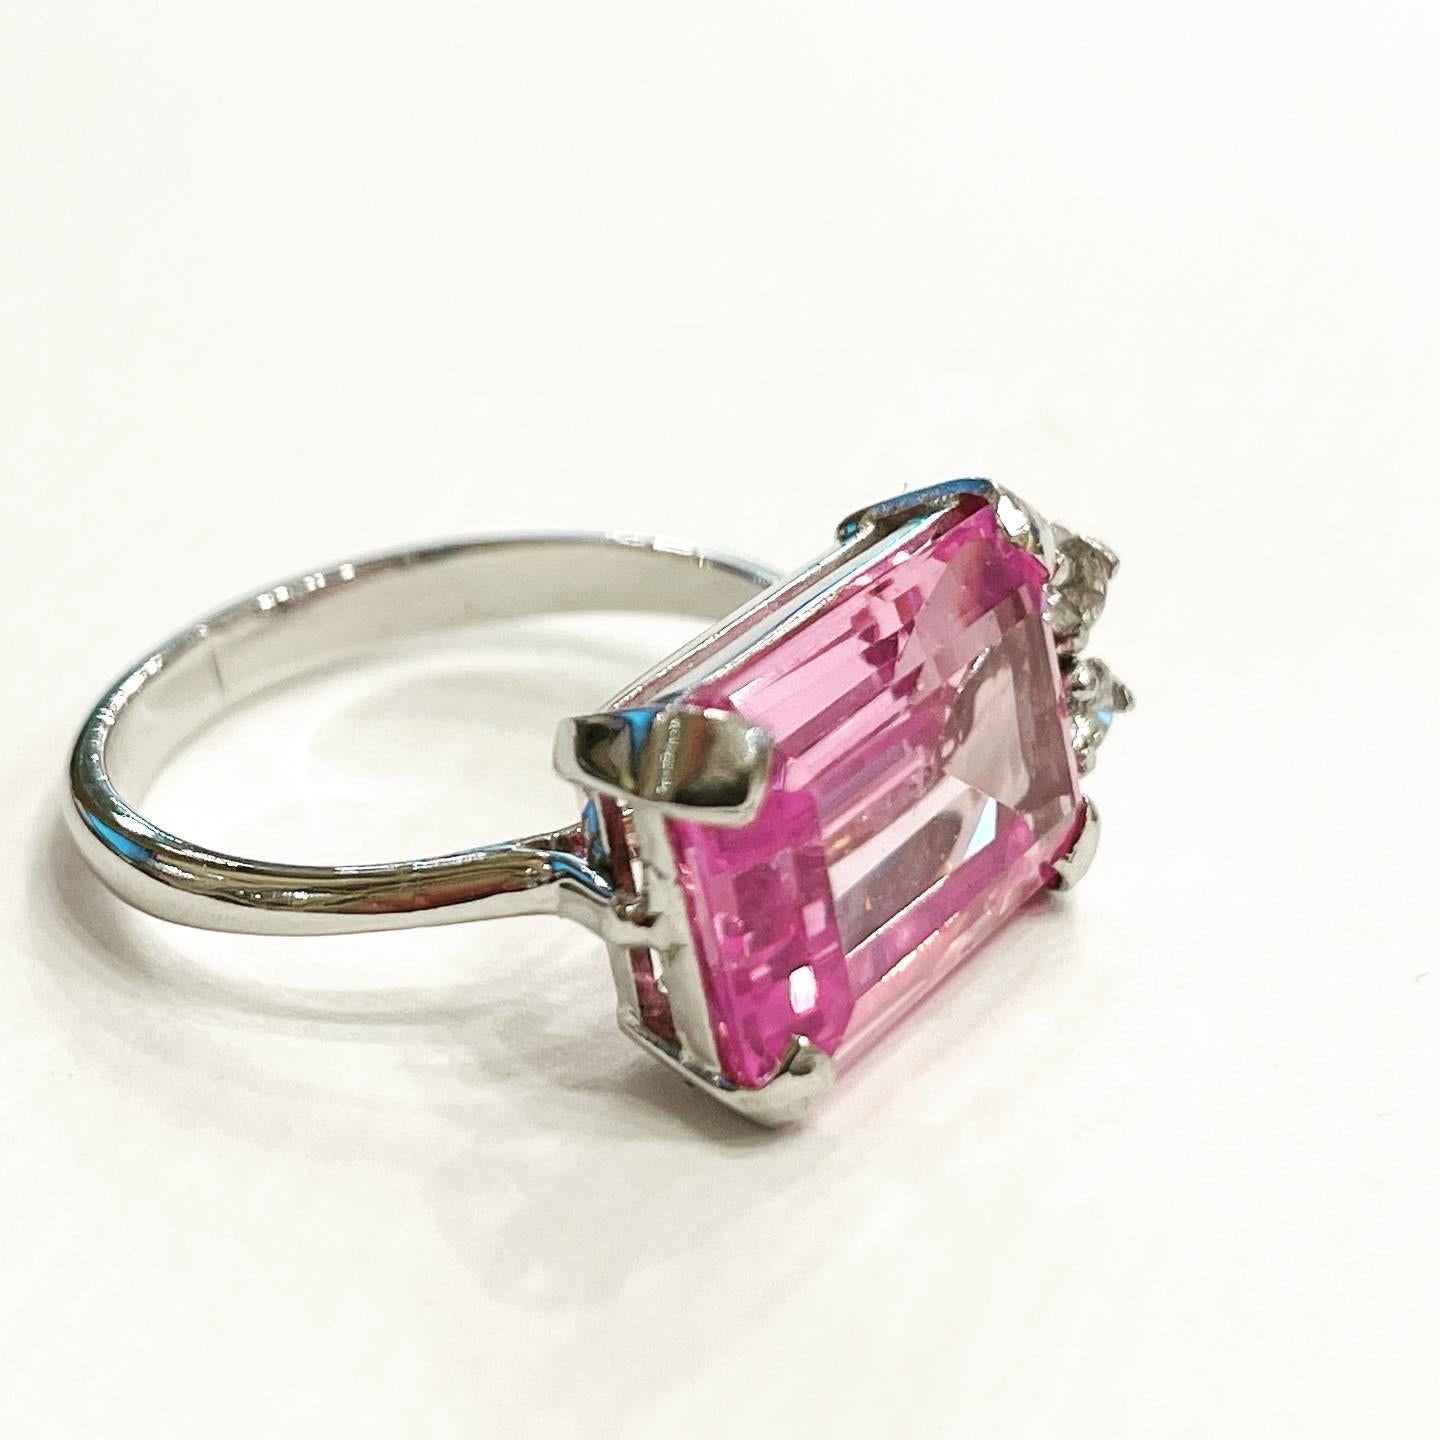 Beautifully designed and handcrafted in 18 karat white gold, this Retro cocktail ring from circa 1950 features a lovely Rose of France measured to weigh approximately 23.5 carats and diamonds.
Superb tank ring, linear and geometrical design typical